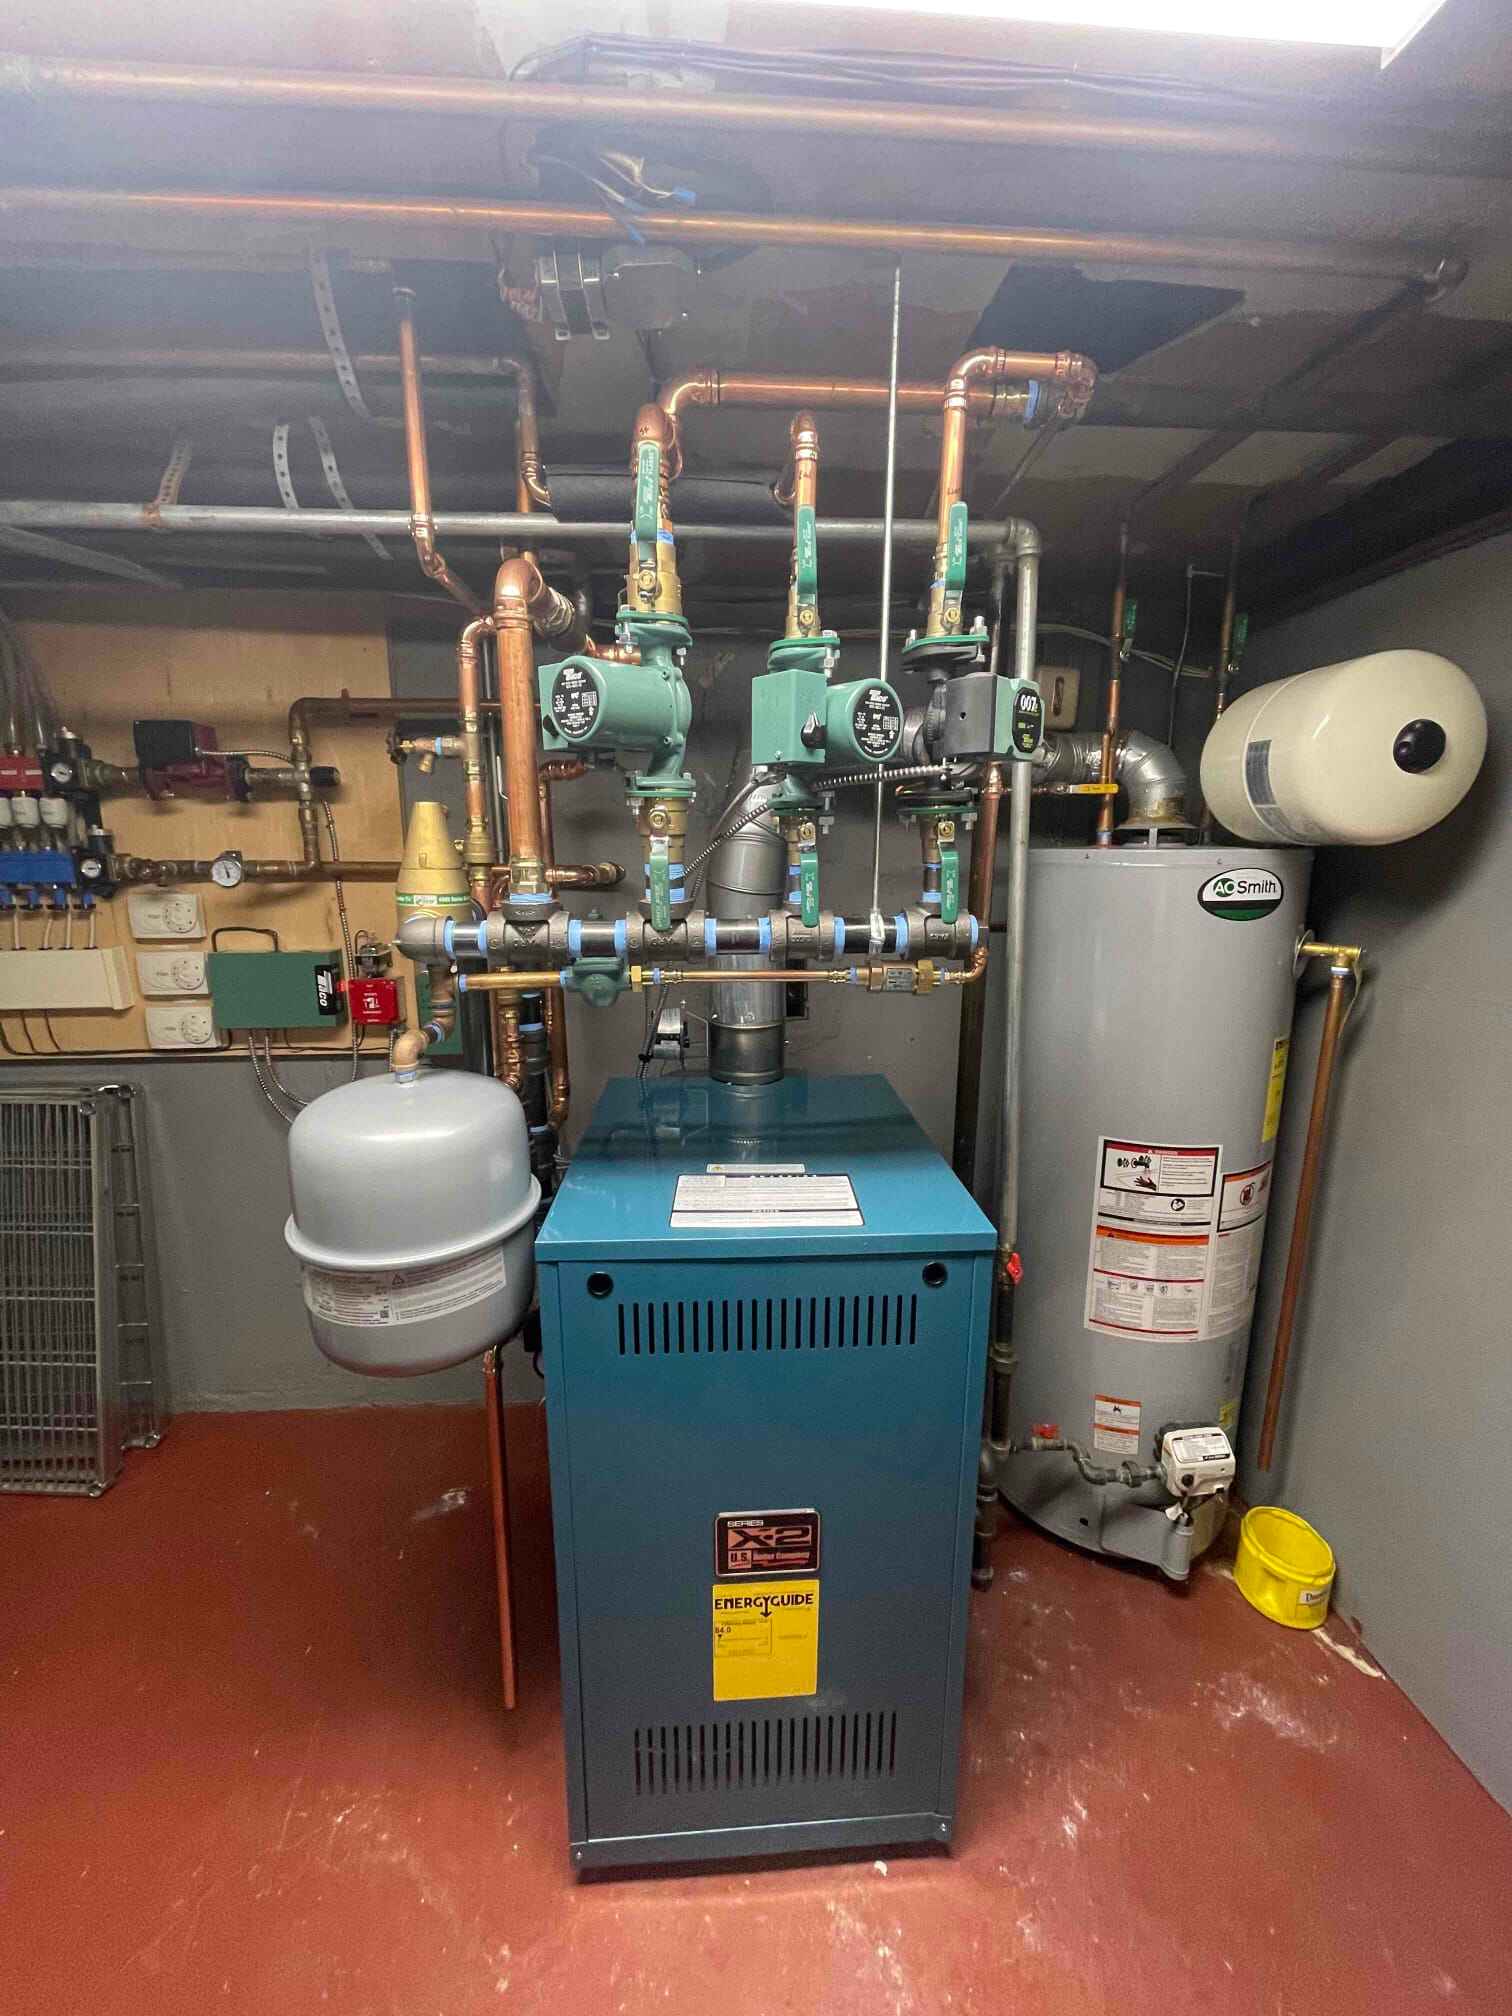 new hydronic boiler installed.